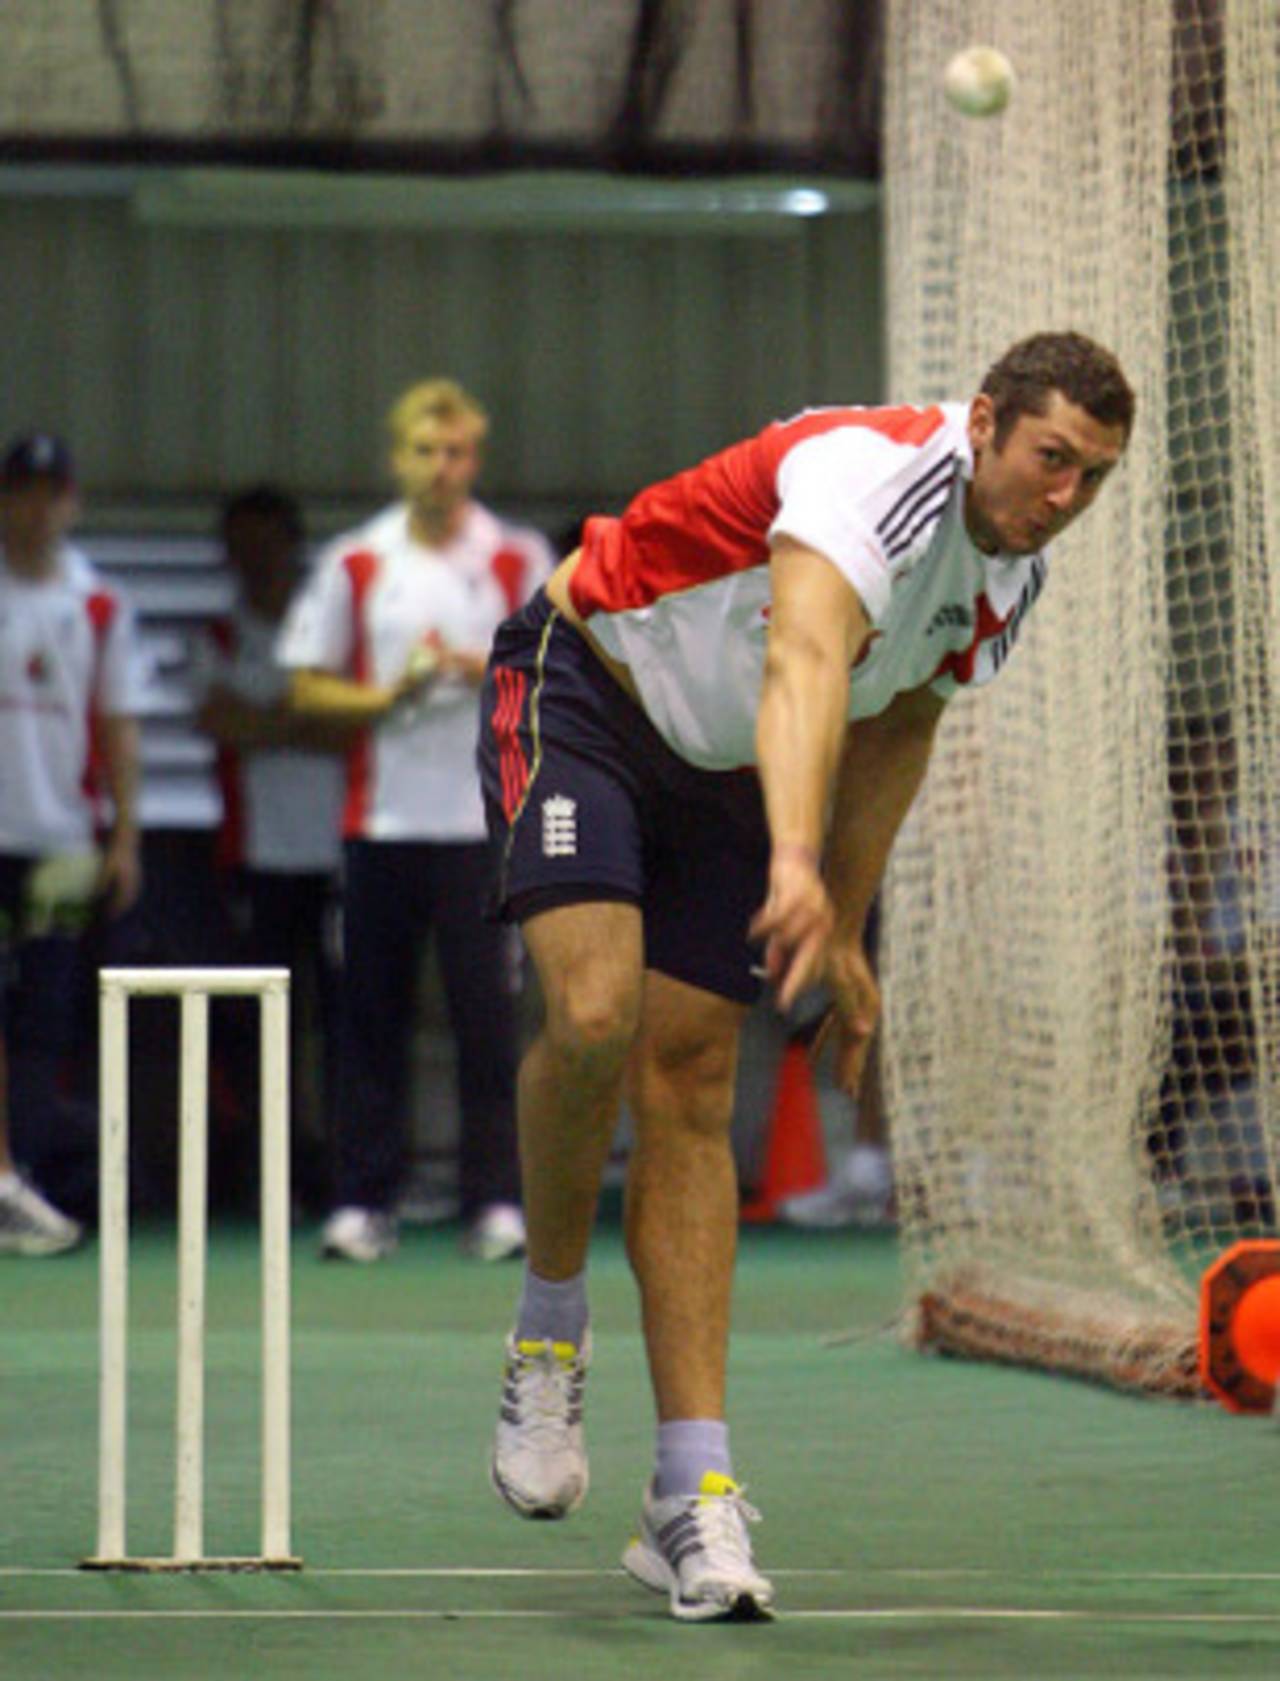 Tim Bresnan bowls in the indoor nets ahead of the fifth and final ODI against South Africa, Durban, December 3, 2009